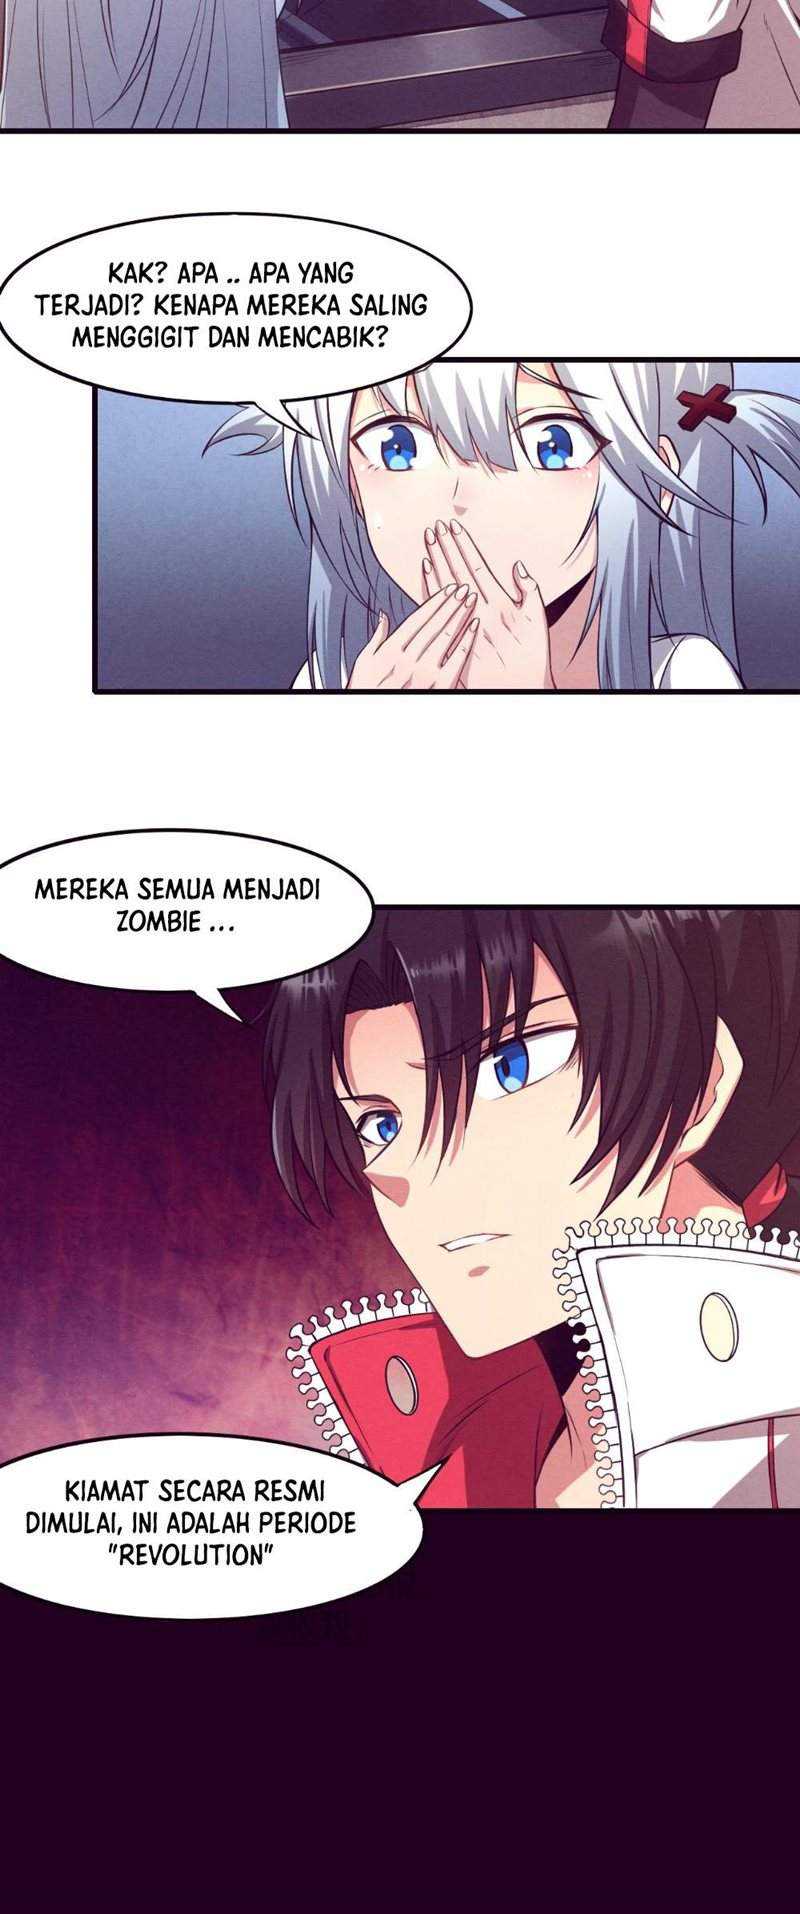 Evolution frenzy Chapter 01 bahasa indoensia